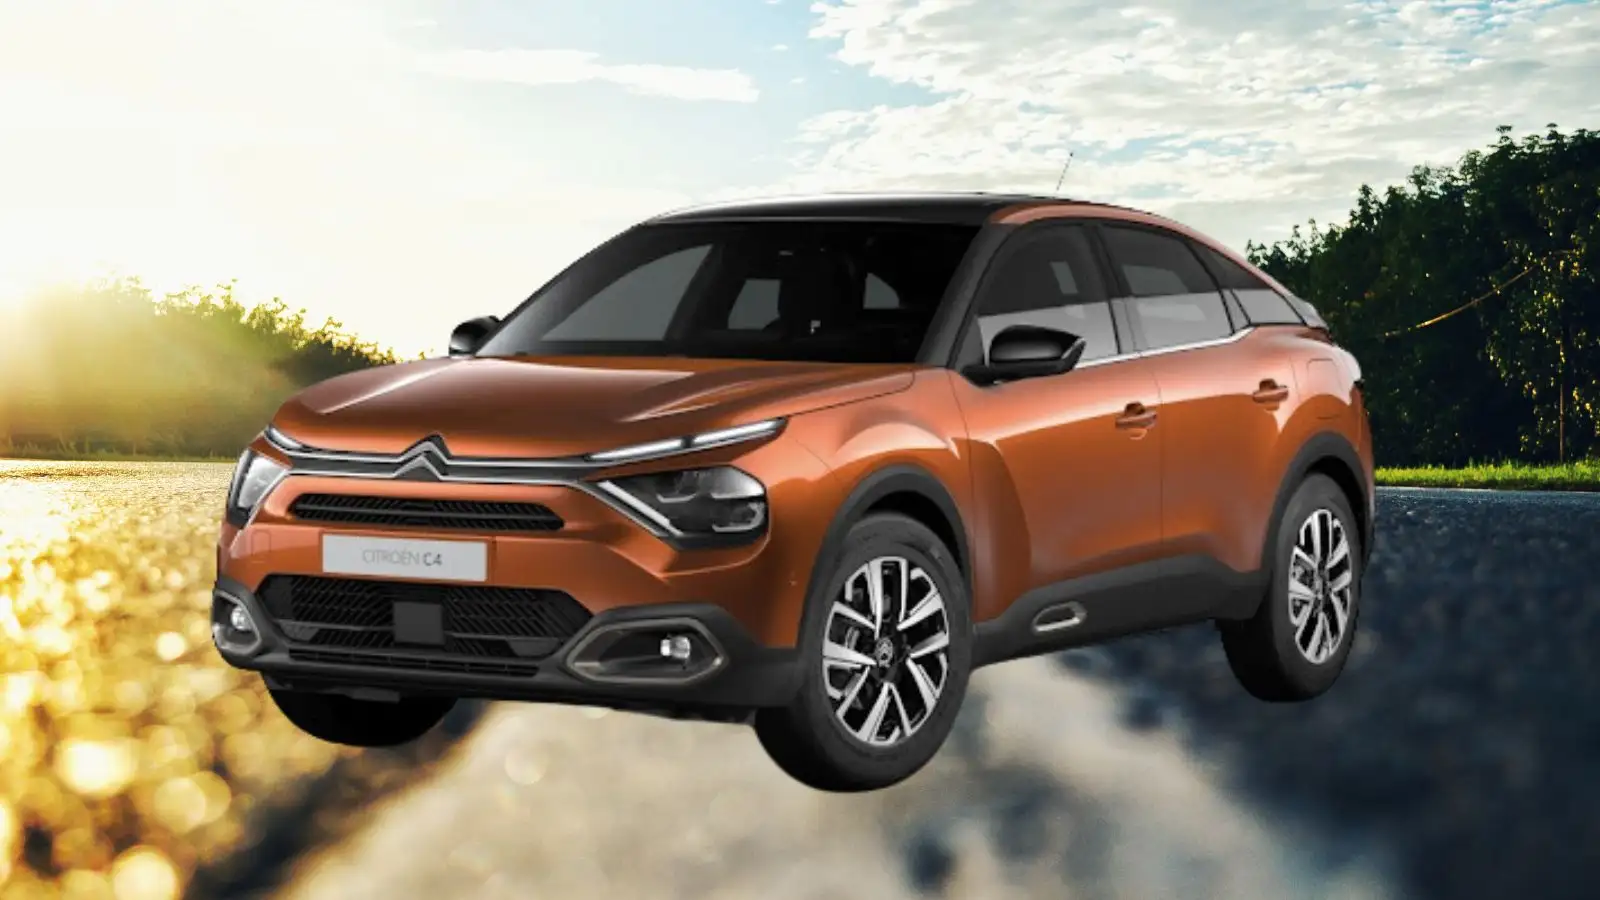 Discover the New Citroën C4: An Innovative Compact Fastback